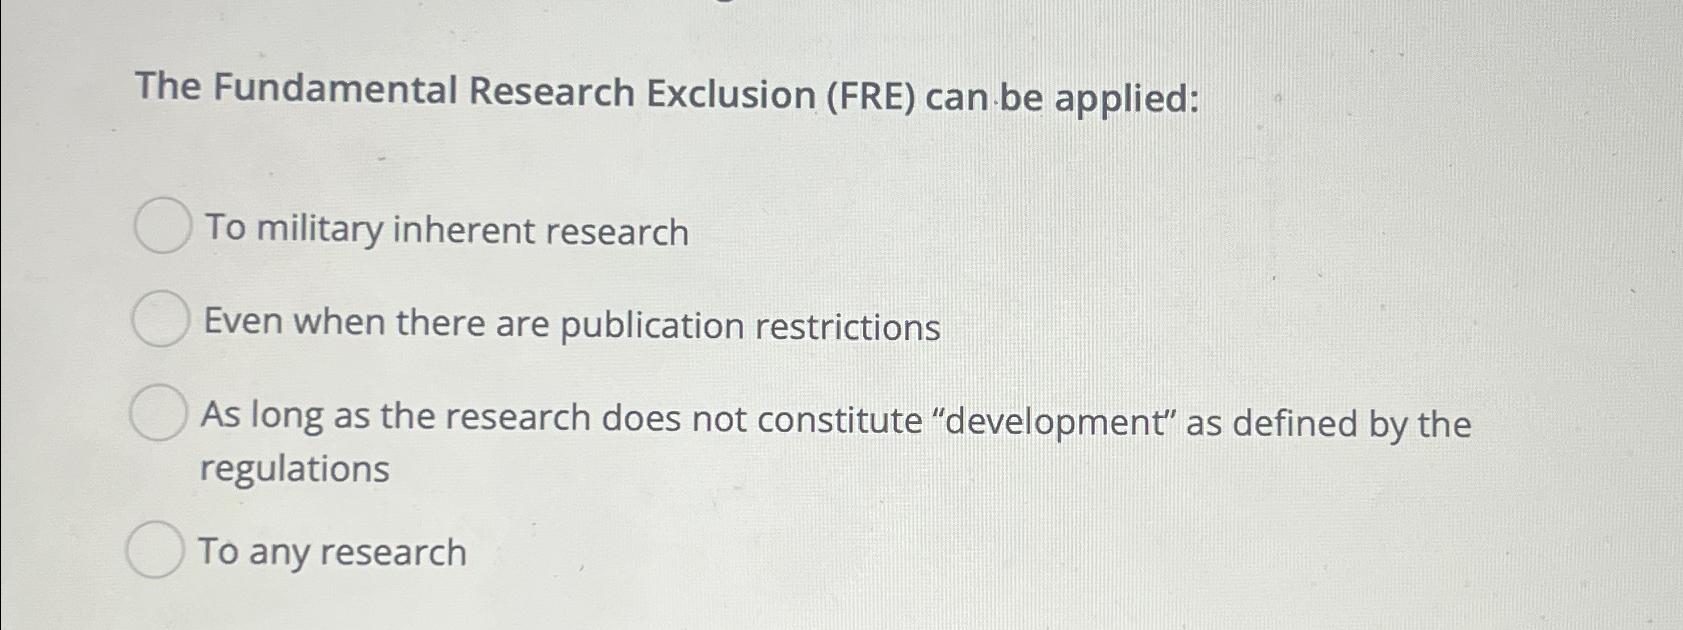 the fundamental research exclusion can be applied